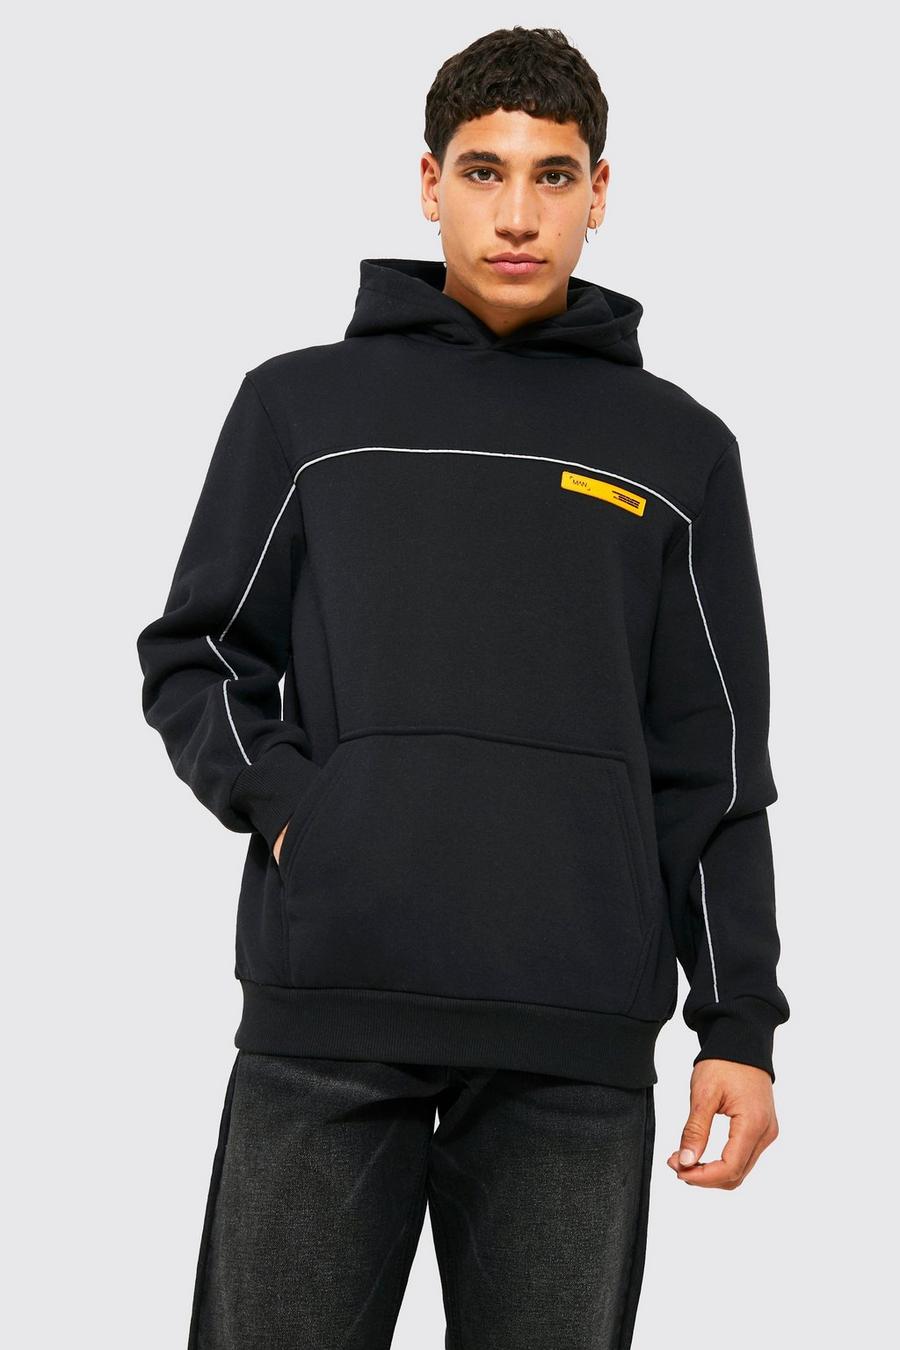 Black Hoodie With Reflective Piping